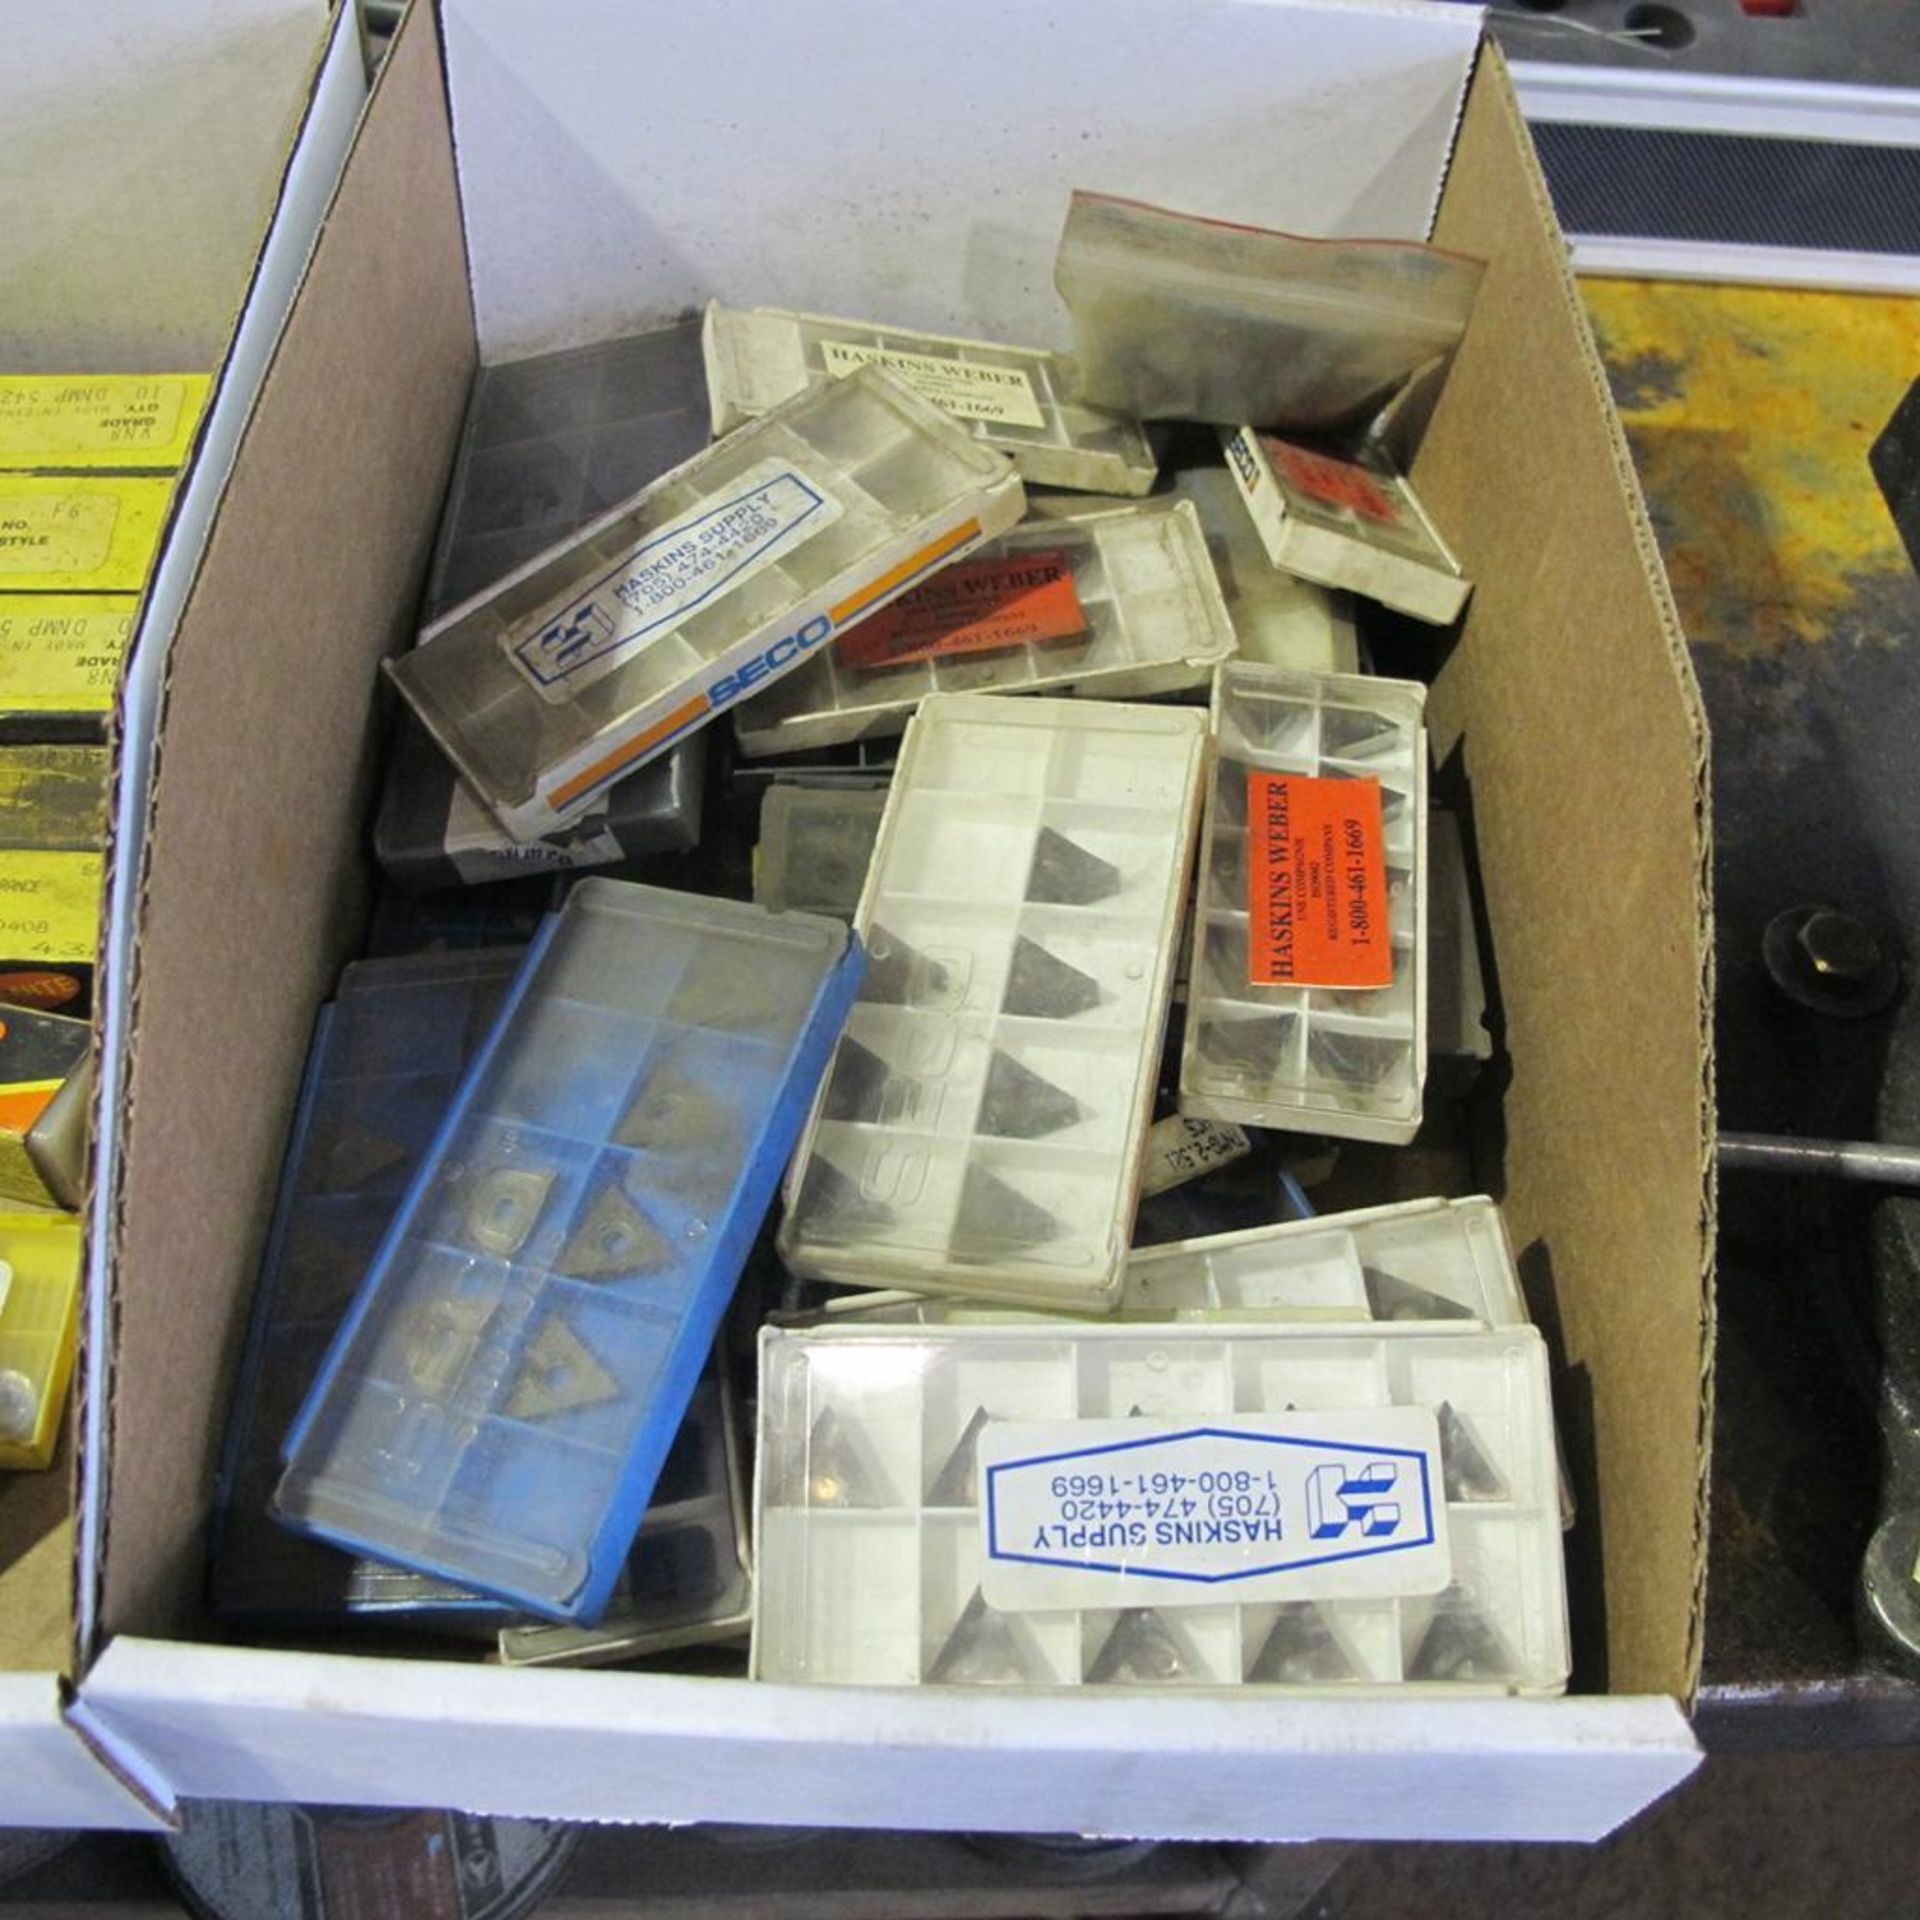 LOT OF 6 BOXES OF CARBIDE CUTTING ATTACHMENTS (MAIN BLDG) - Image 7 of 7